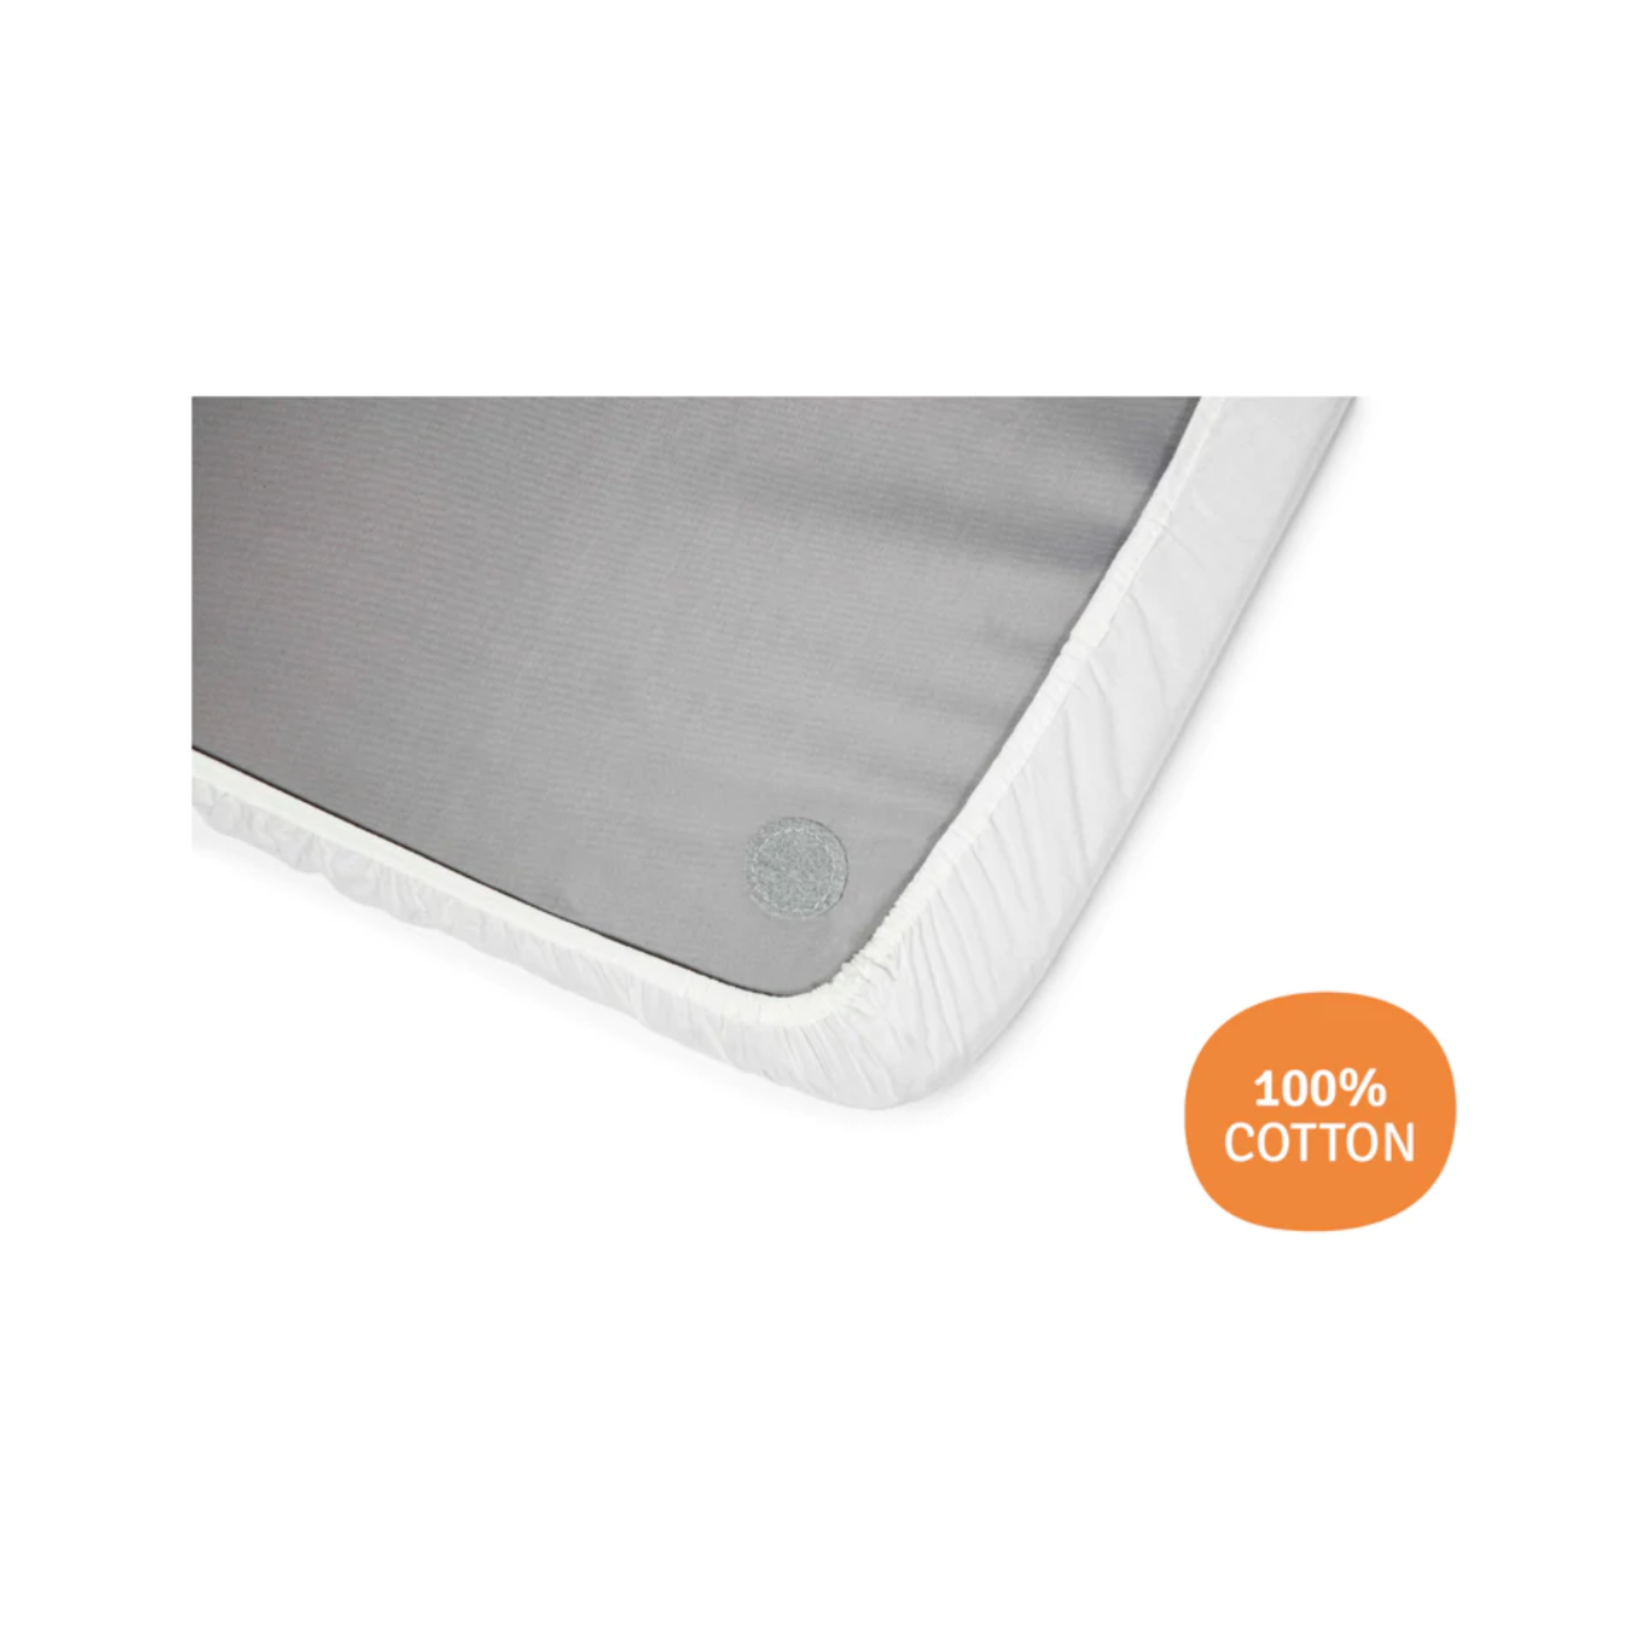 AeroMoov Instant Travel Cot Fitted Sheet